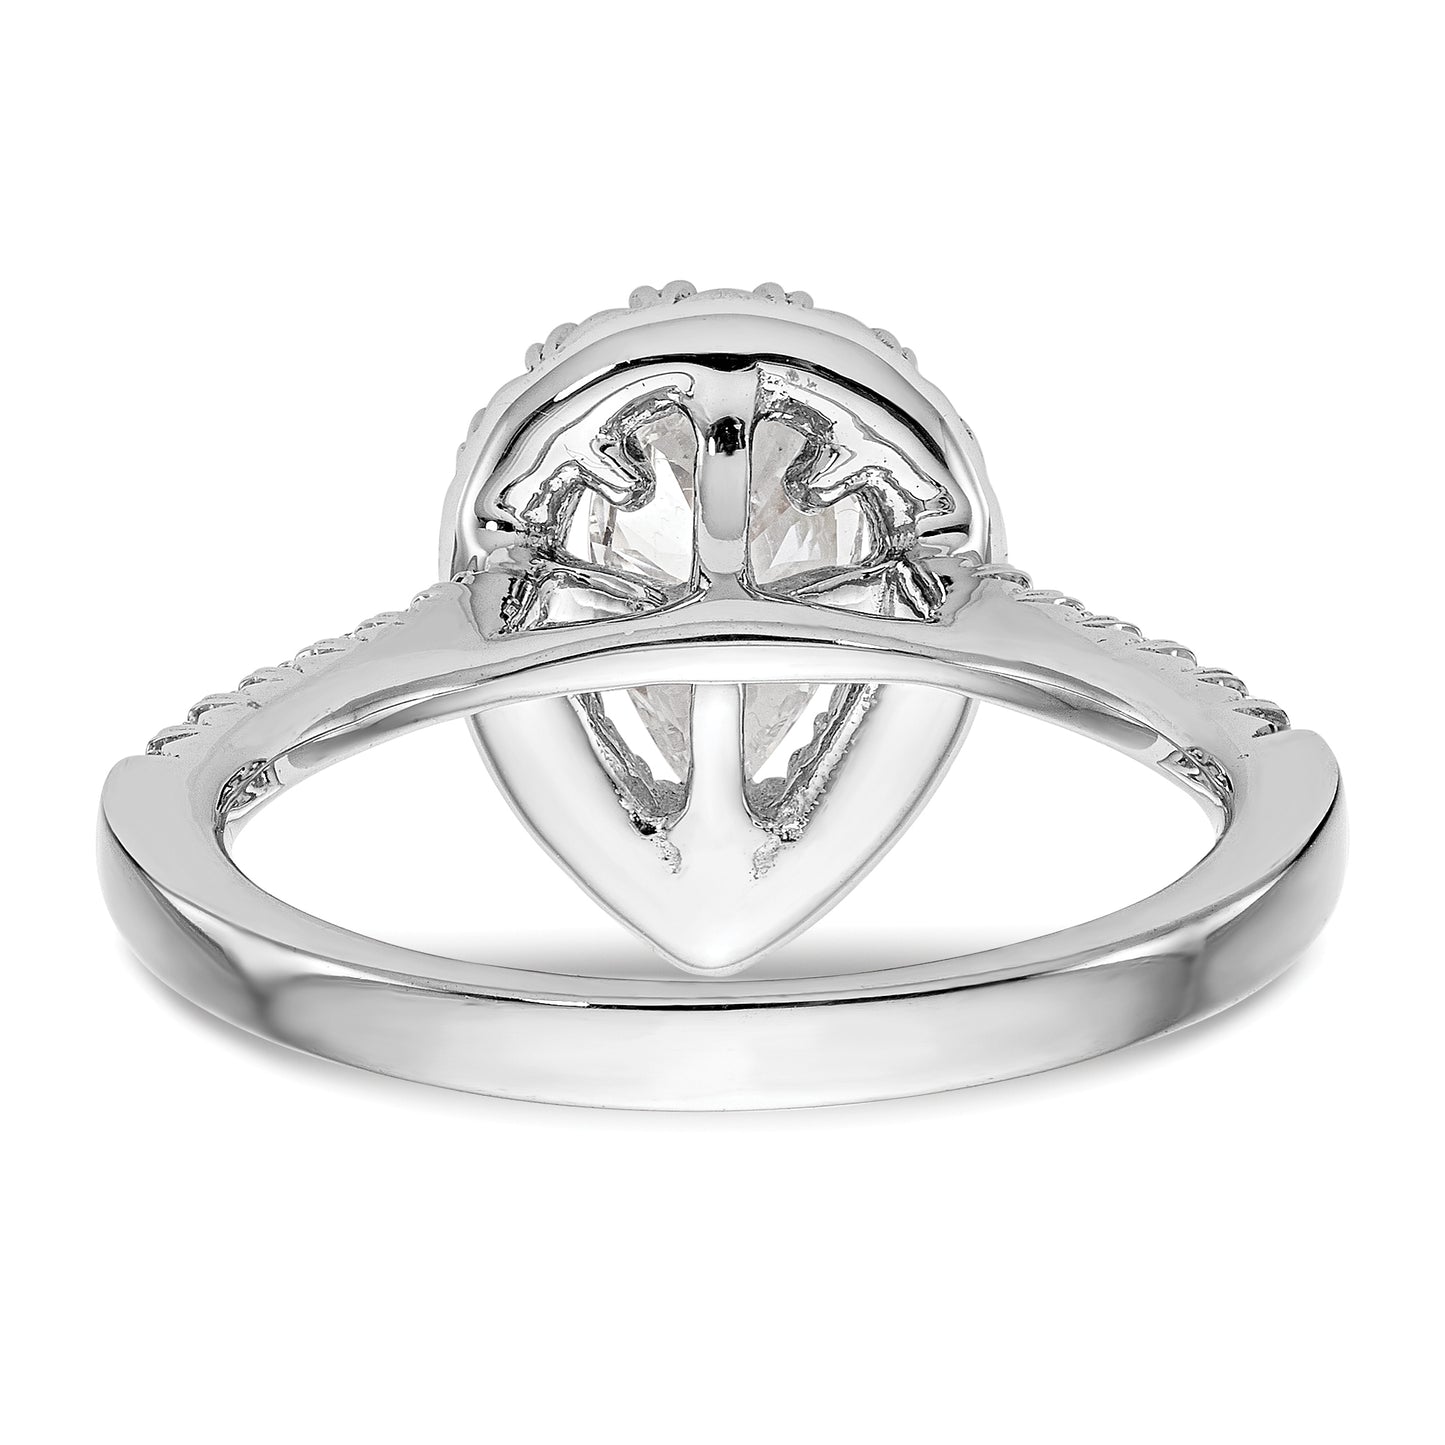 14KW DIAMOND PEAR SHAPED HALO TO FIT 3/4 CT CTR